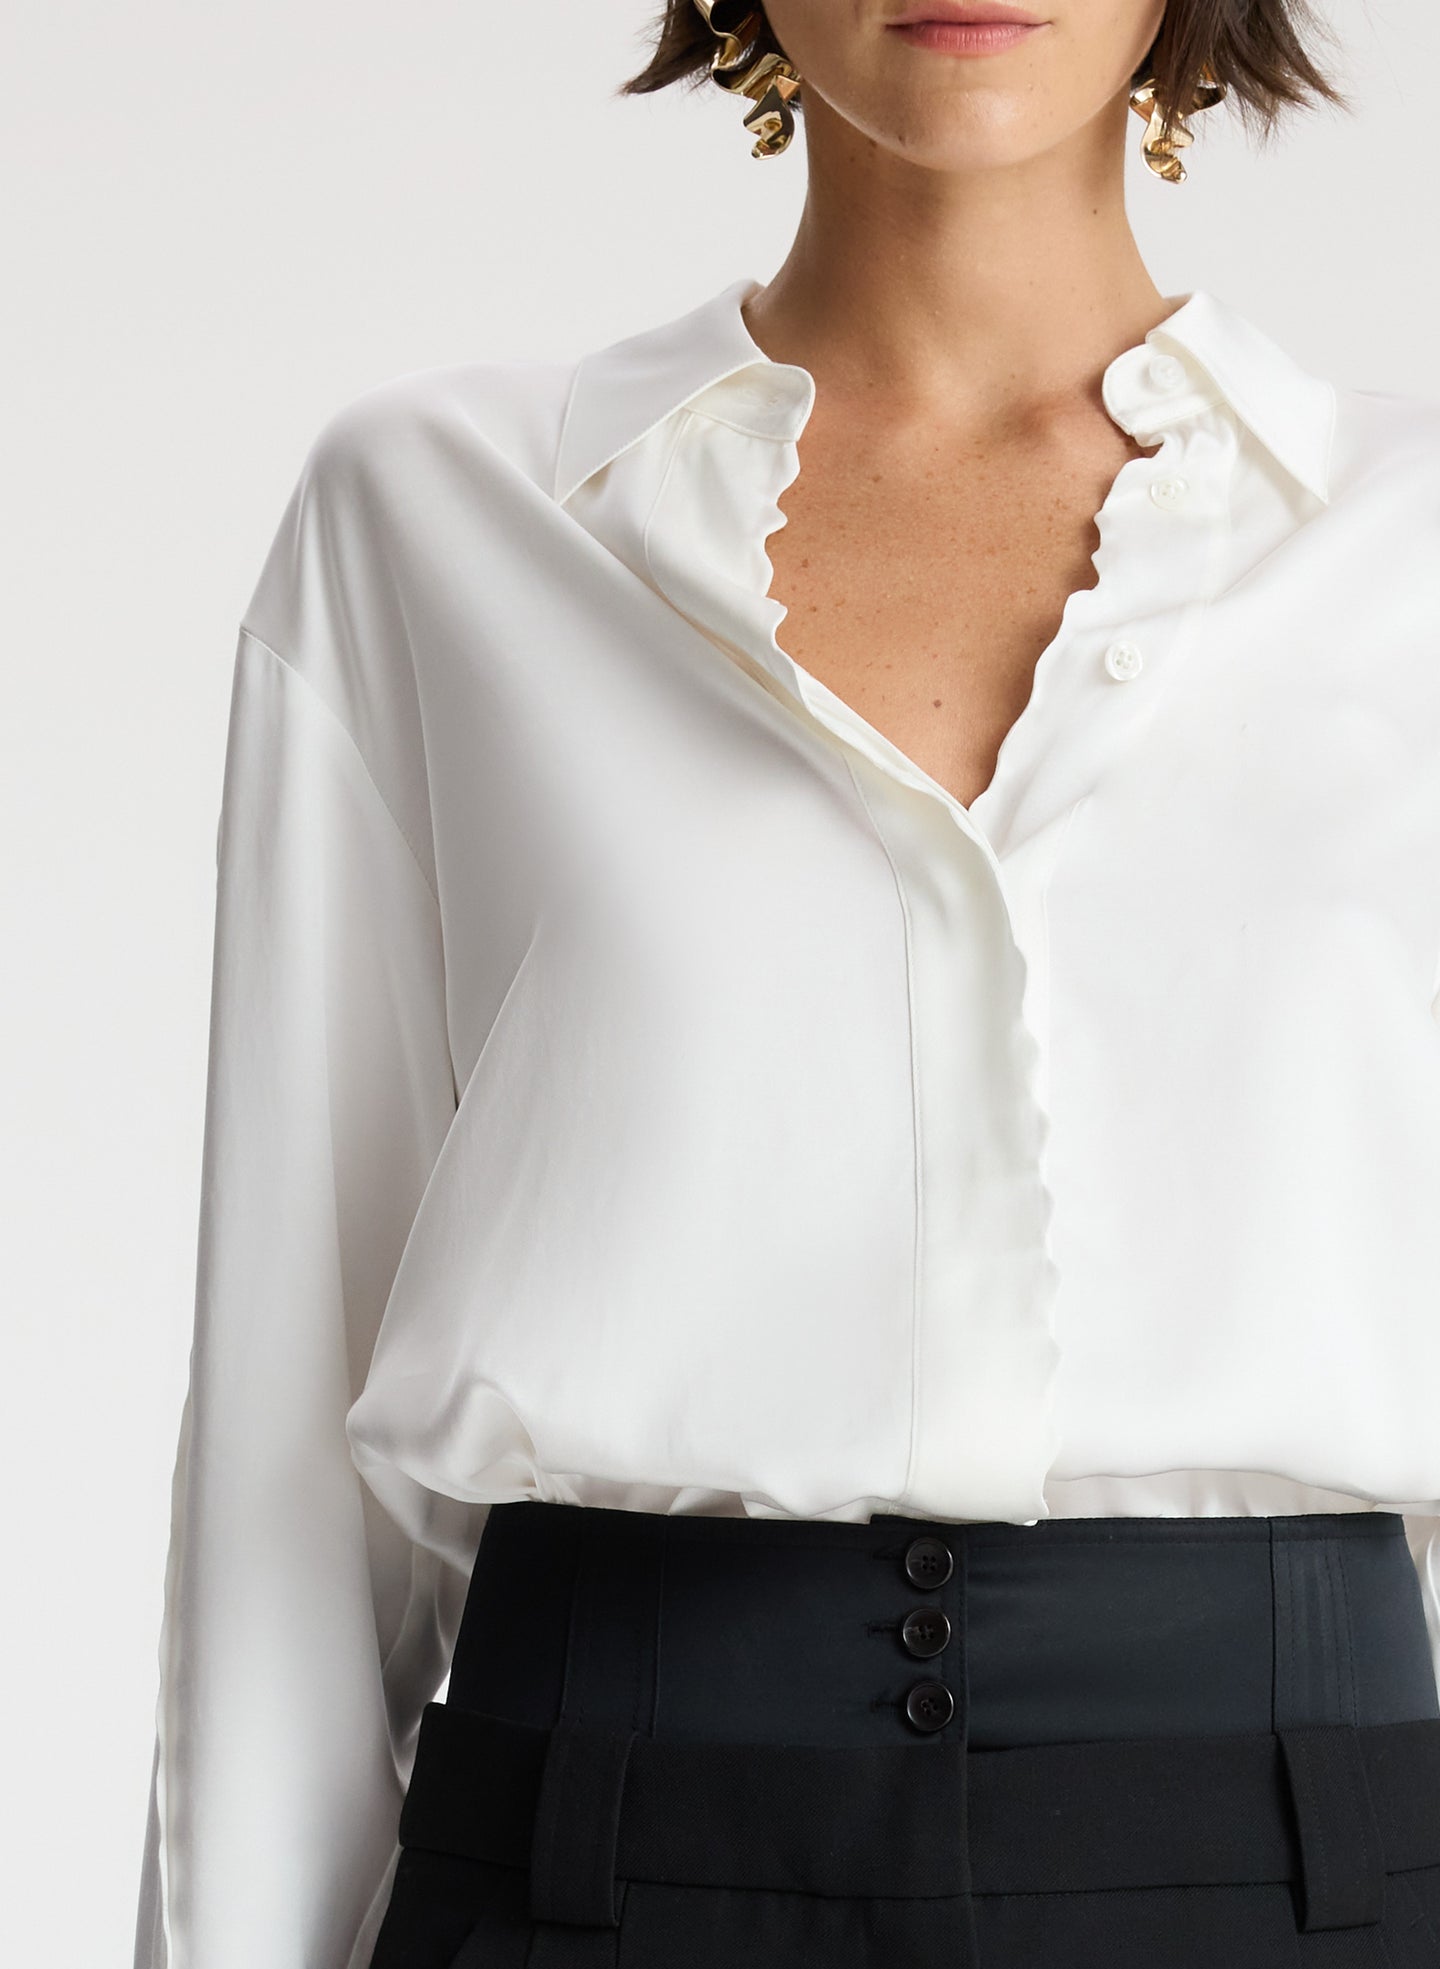 detail view of woman wearing white scalloped detailed long sleeve top and black pants